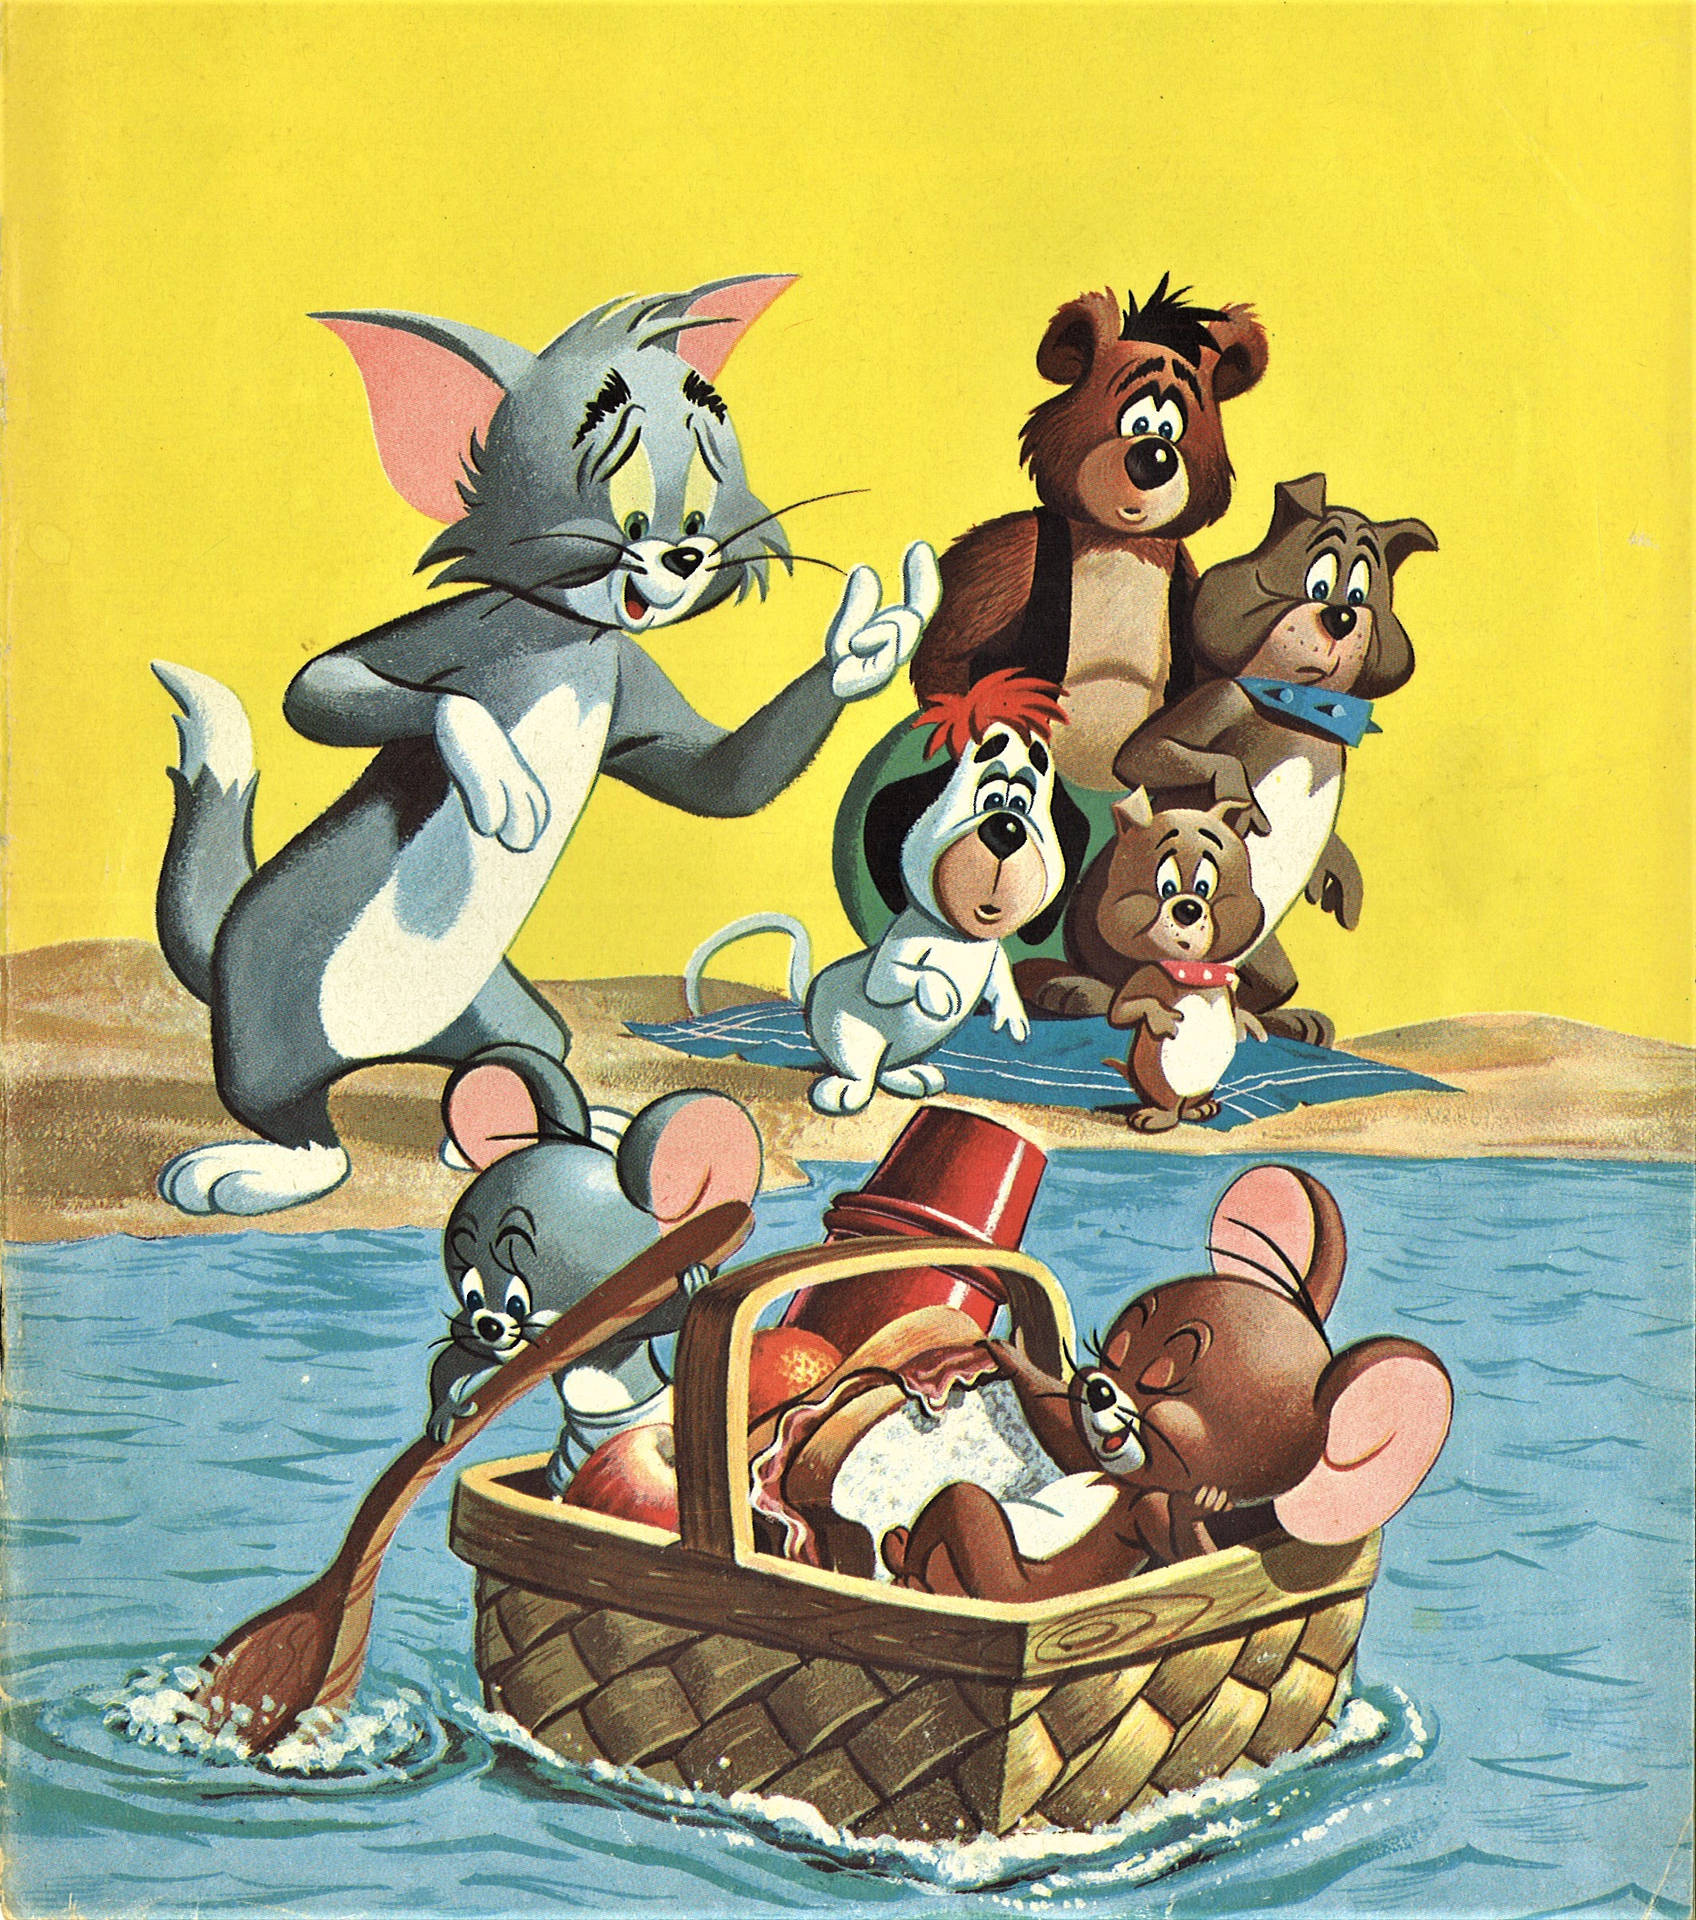 Riding A Basket Boat, Tom And Jerry Aesthetic Background